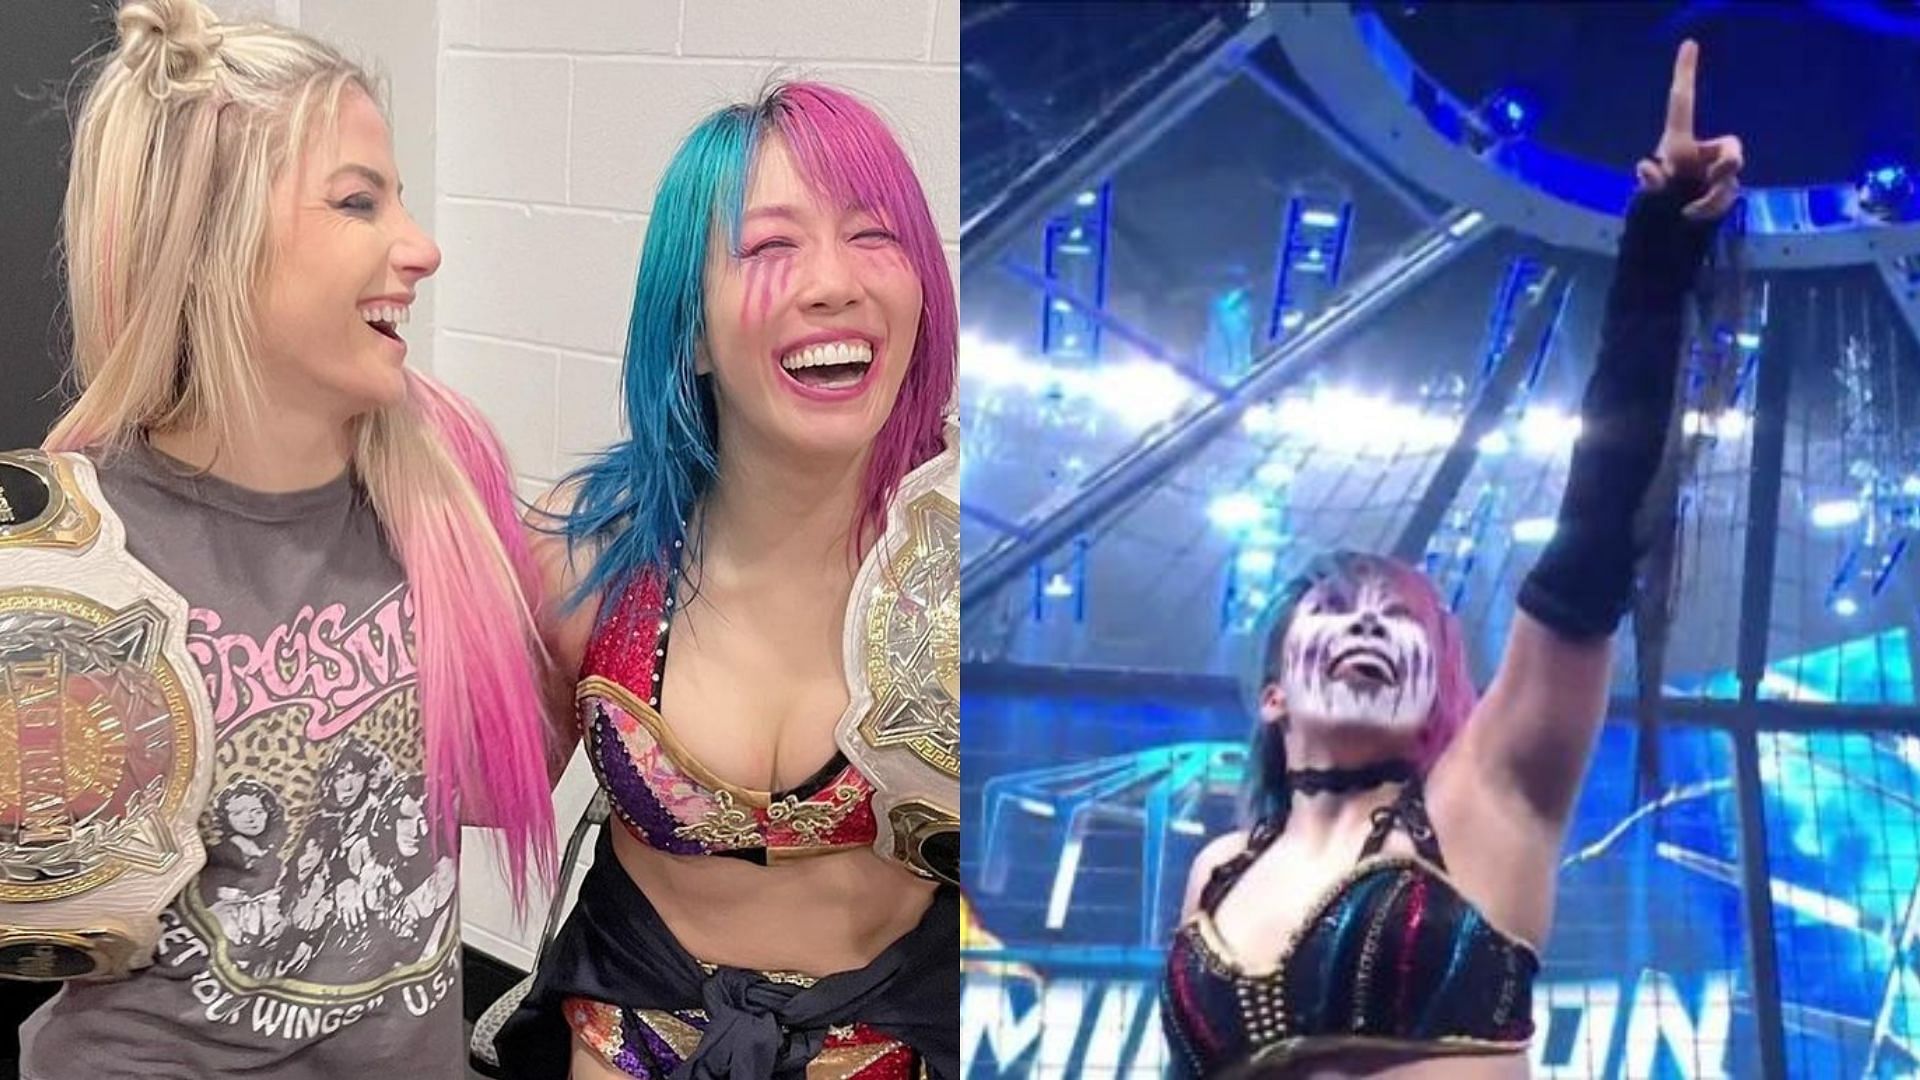 Asuka and Alexa Bliss are former WWE Women